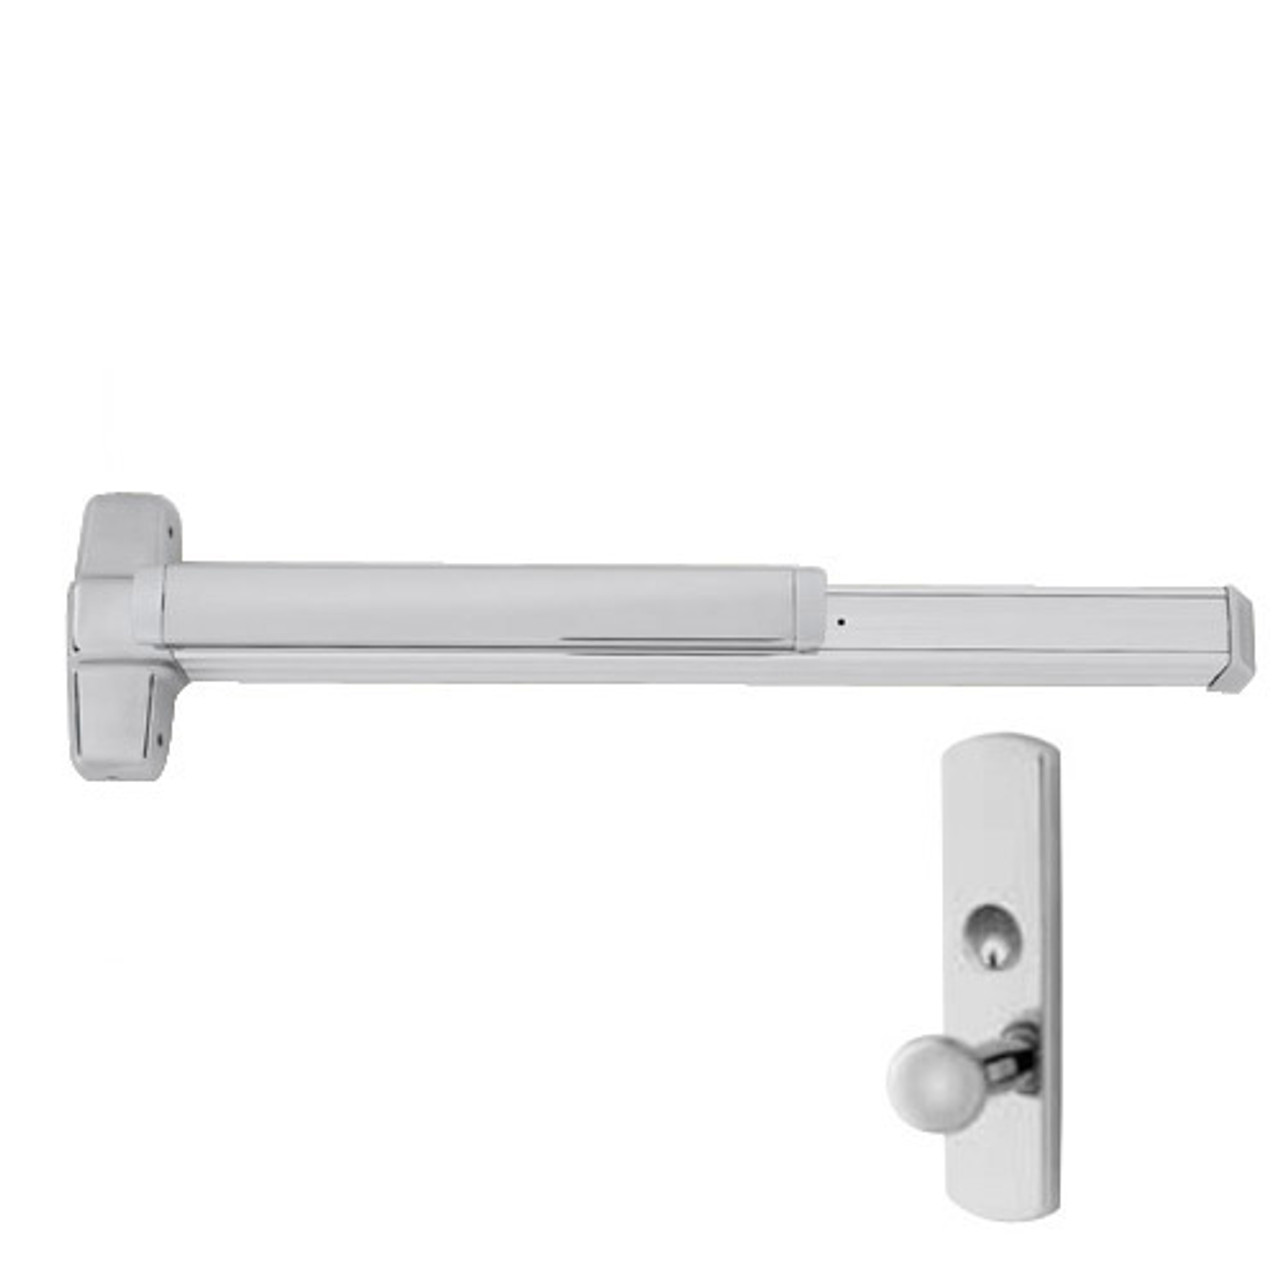 EL9847WDC-K-US32D-3 Von Duprin Exit Device with Electric Latch Retraction in Satin Stainless